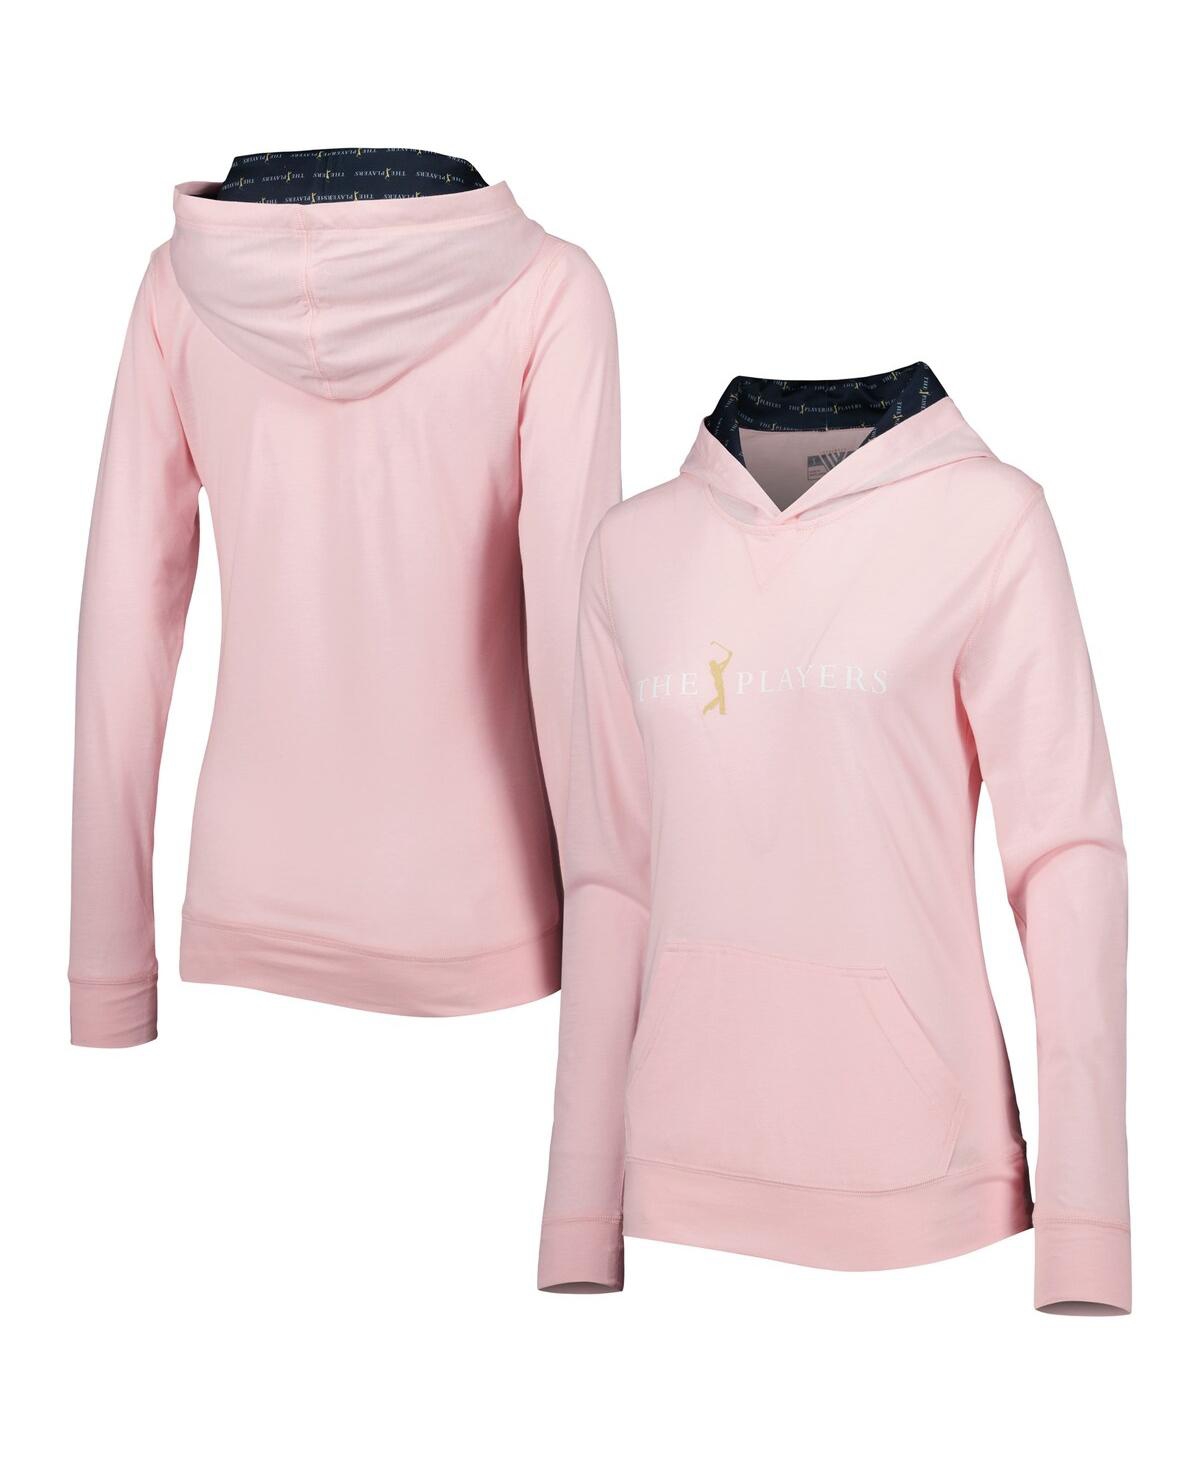 LEVELWEAR WOMEN'S LEVELWEAR PINK THE PLAYERS RECOVERY PULLOVER HOODIE